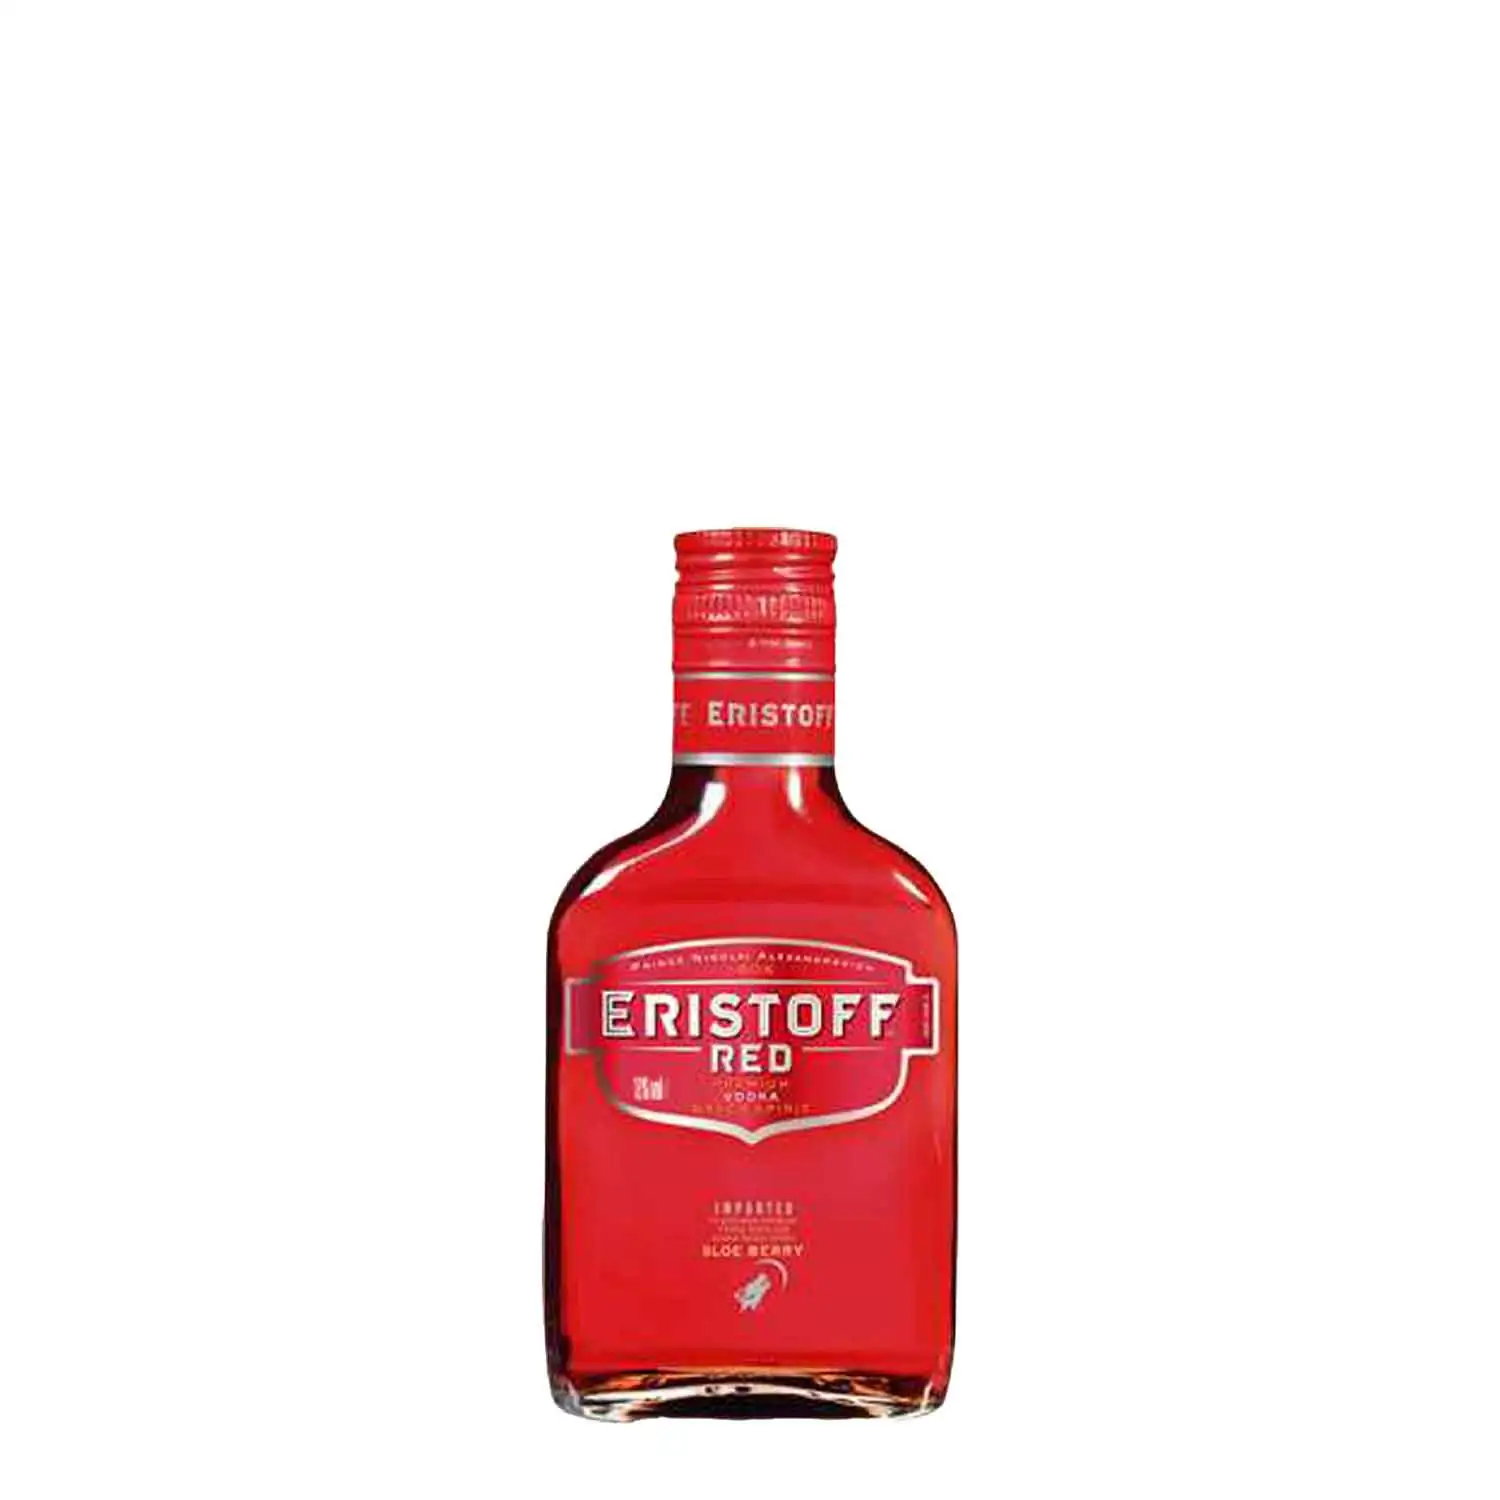 Eristoff rouge 20cl Alc 18% - Buy at Real Tobacco